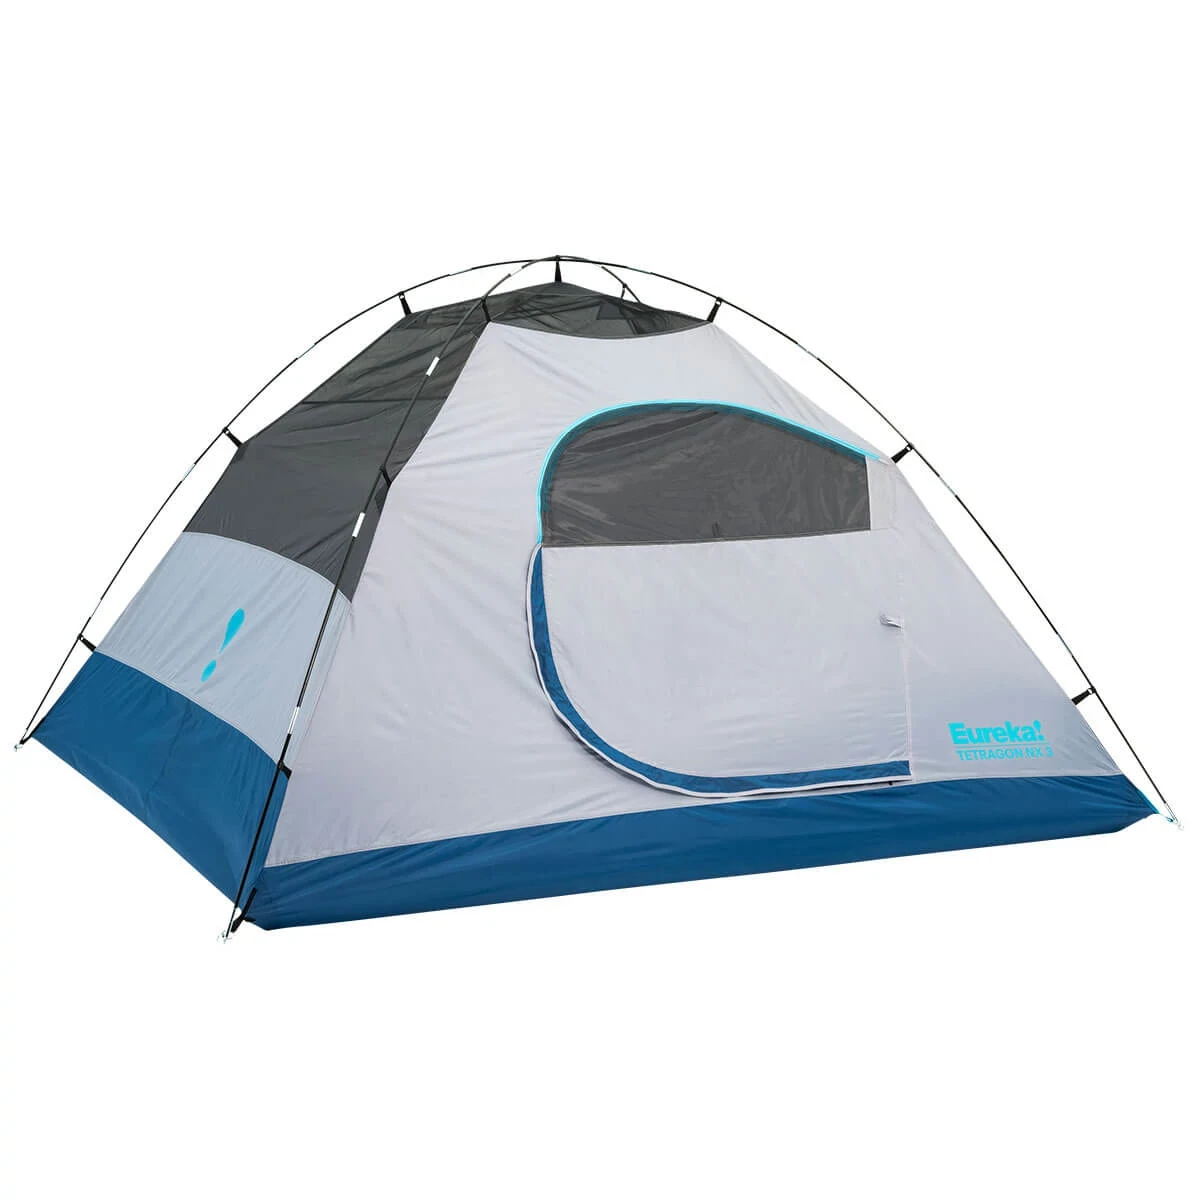 Tetragon NX 3 tent without rainfly